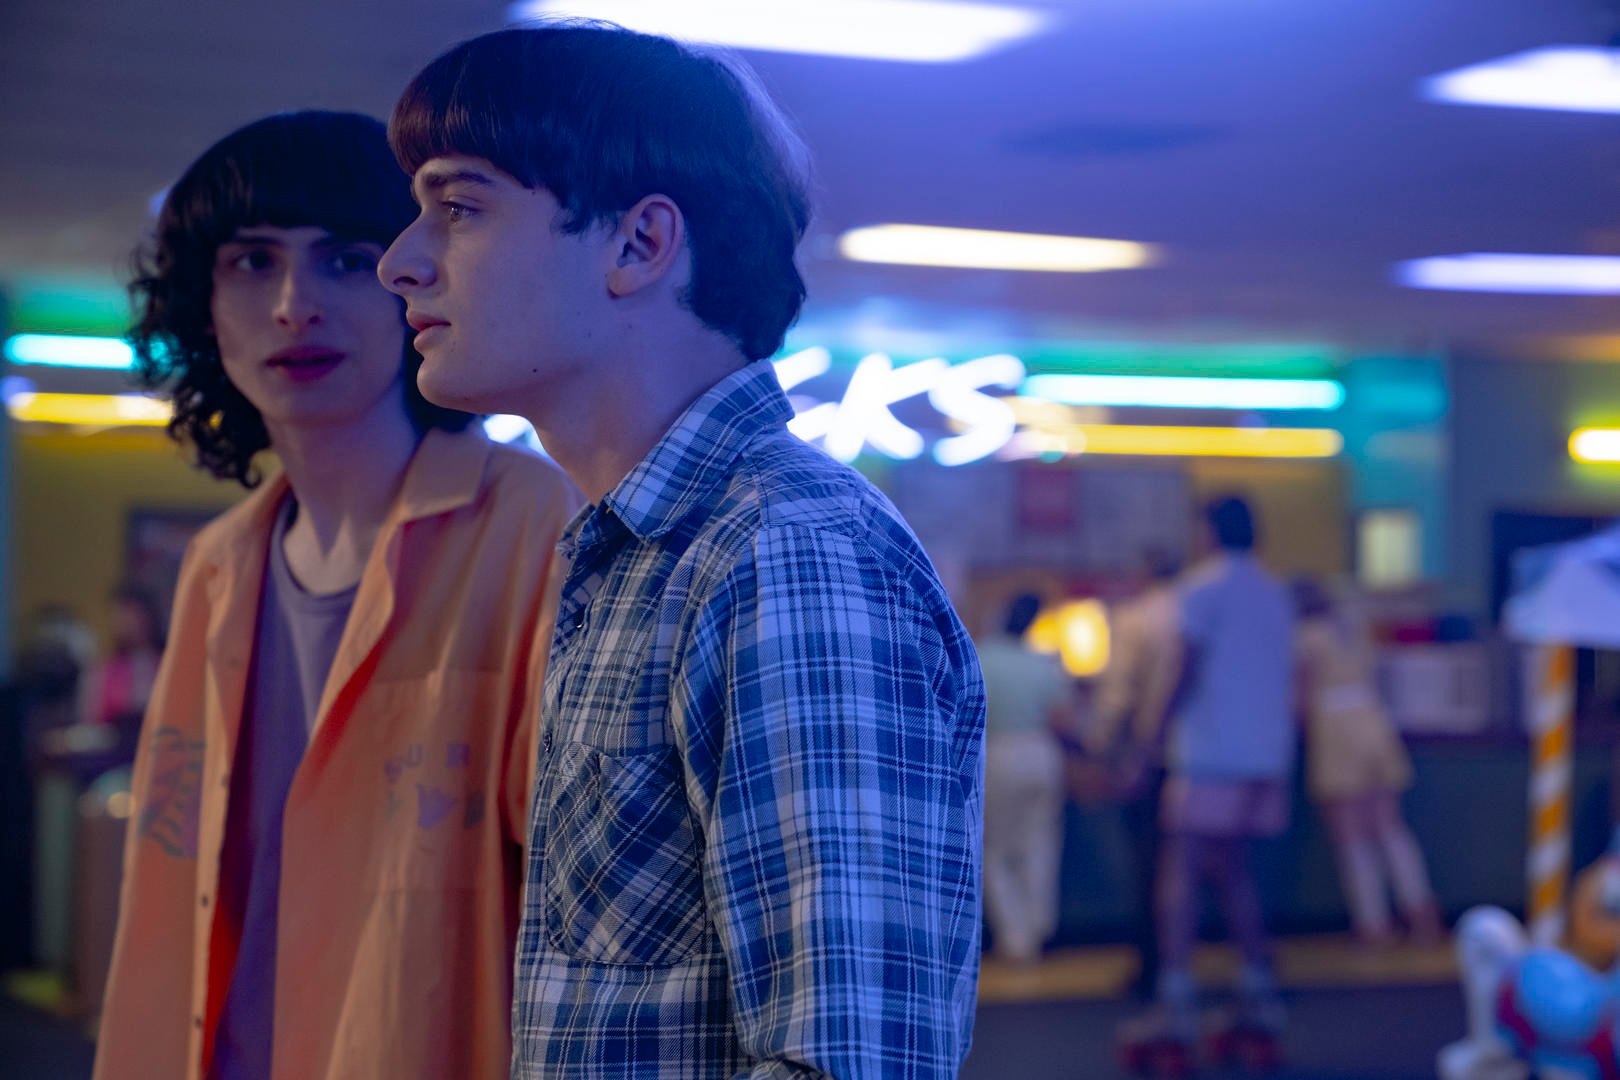 Stranger Things: Will Byers' Sexuality Is 'Up for Interpretation